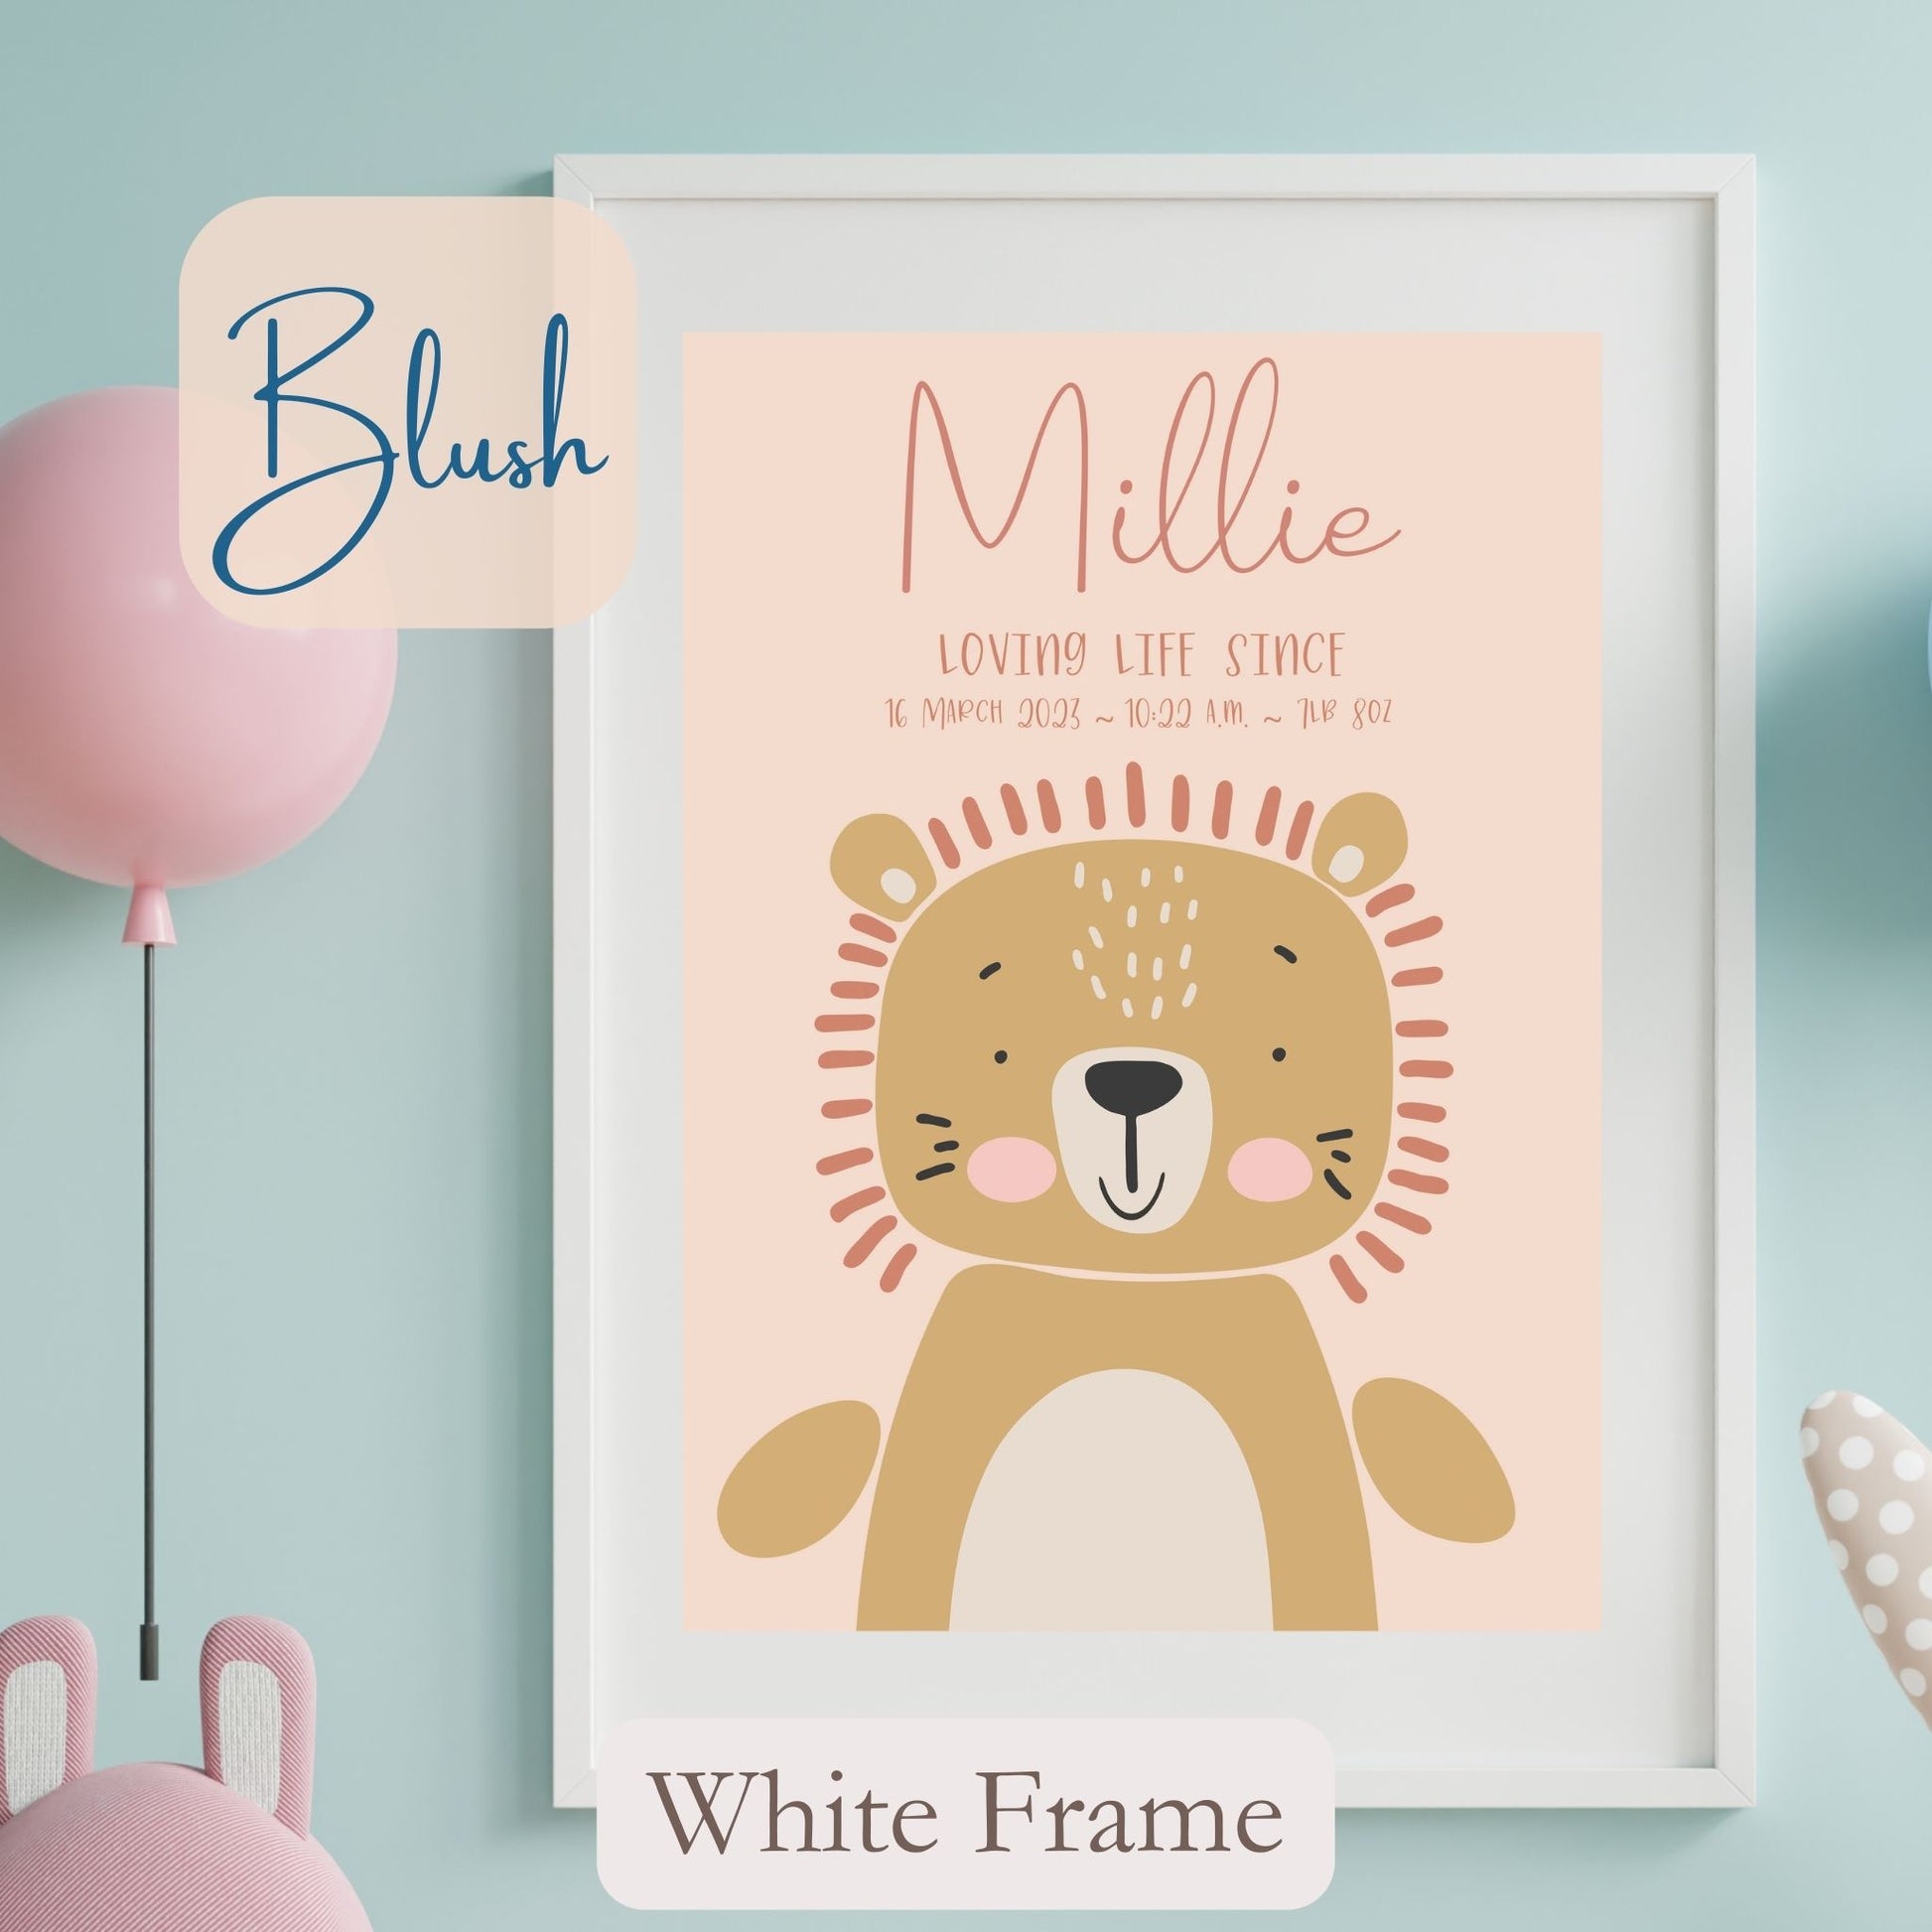 Personalised Framed Print with cute Lion, on blush coloured background with child’s name, and wording under name. White Frame.